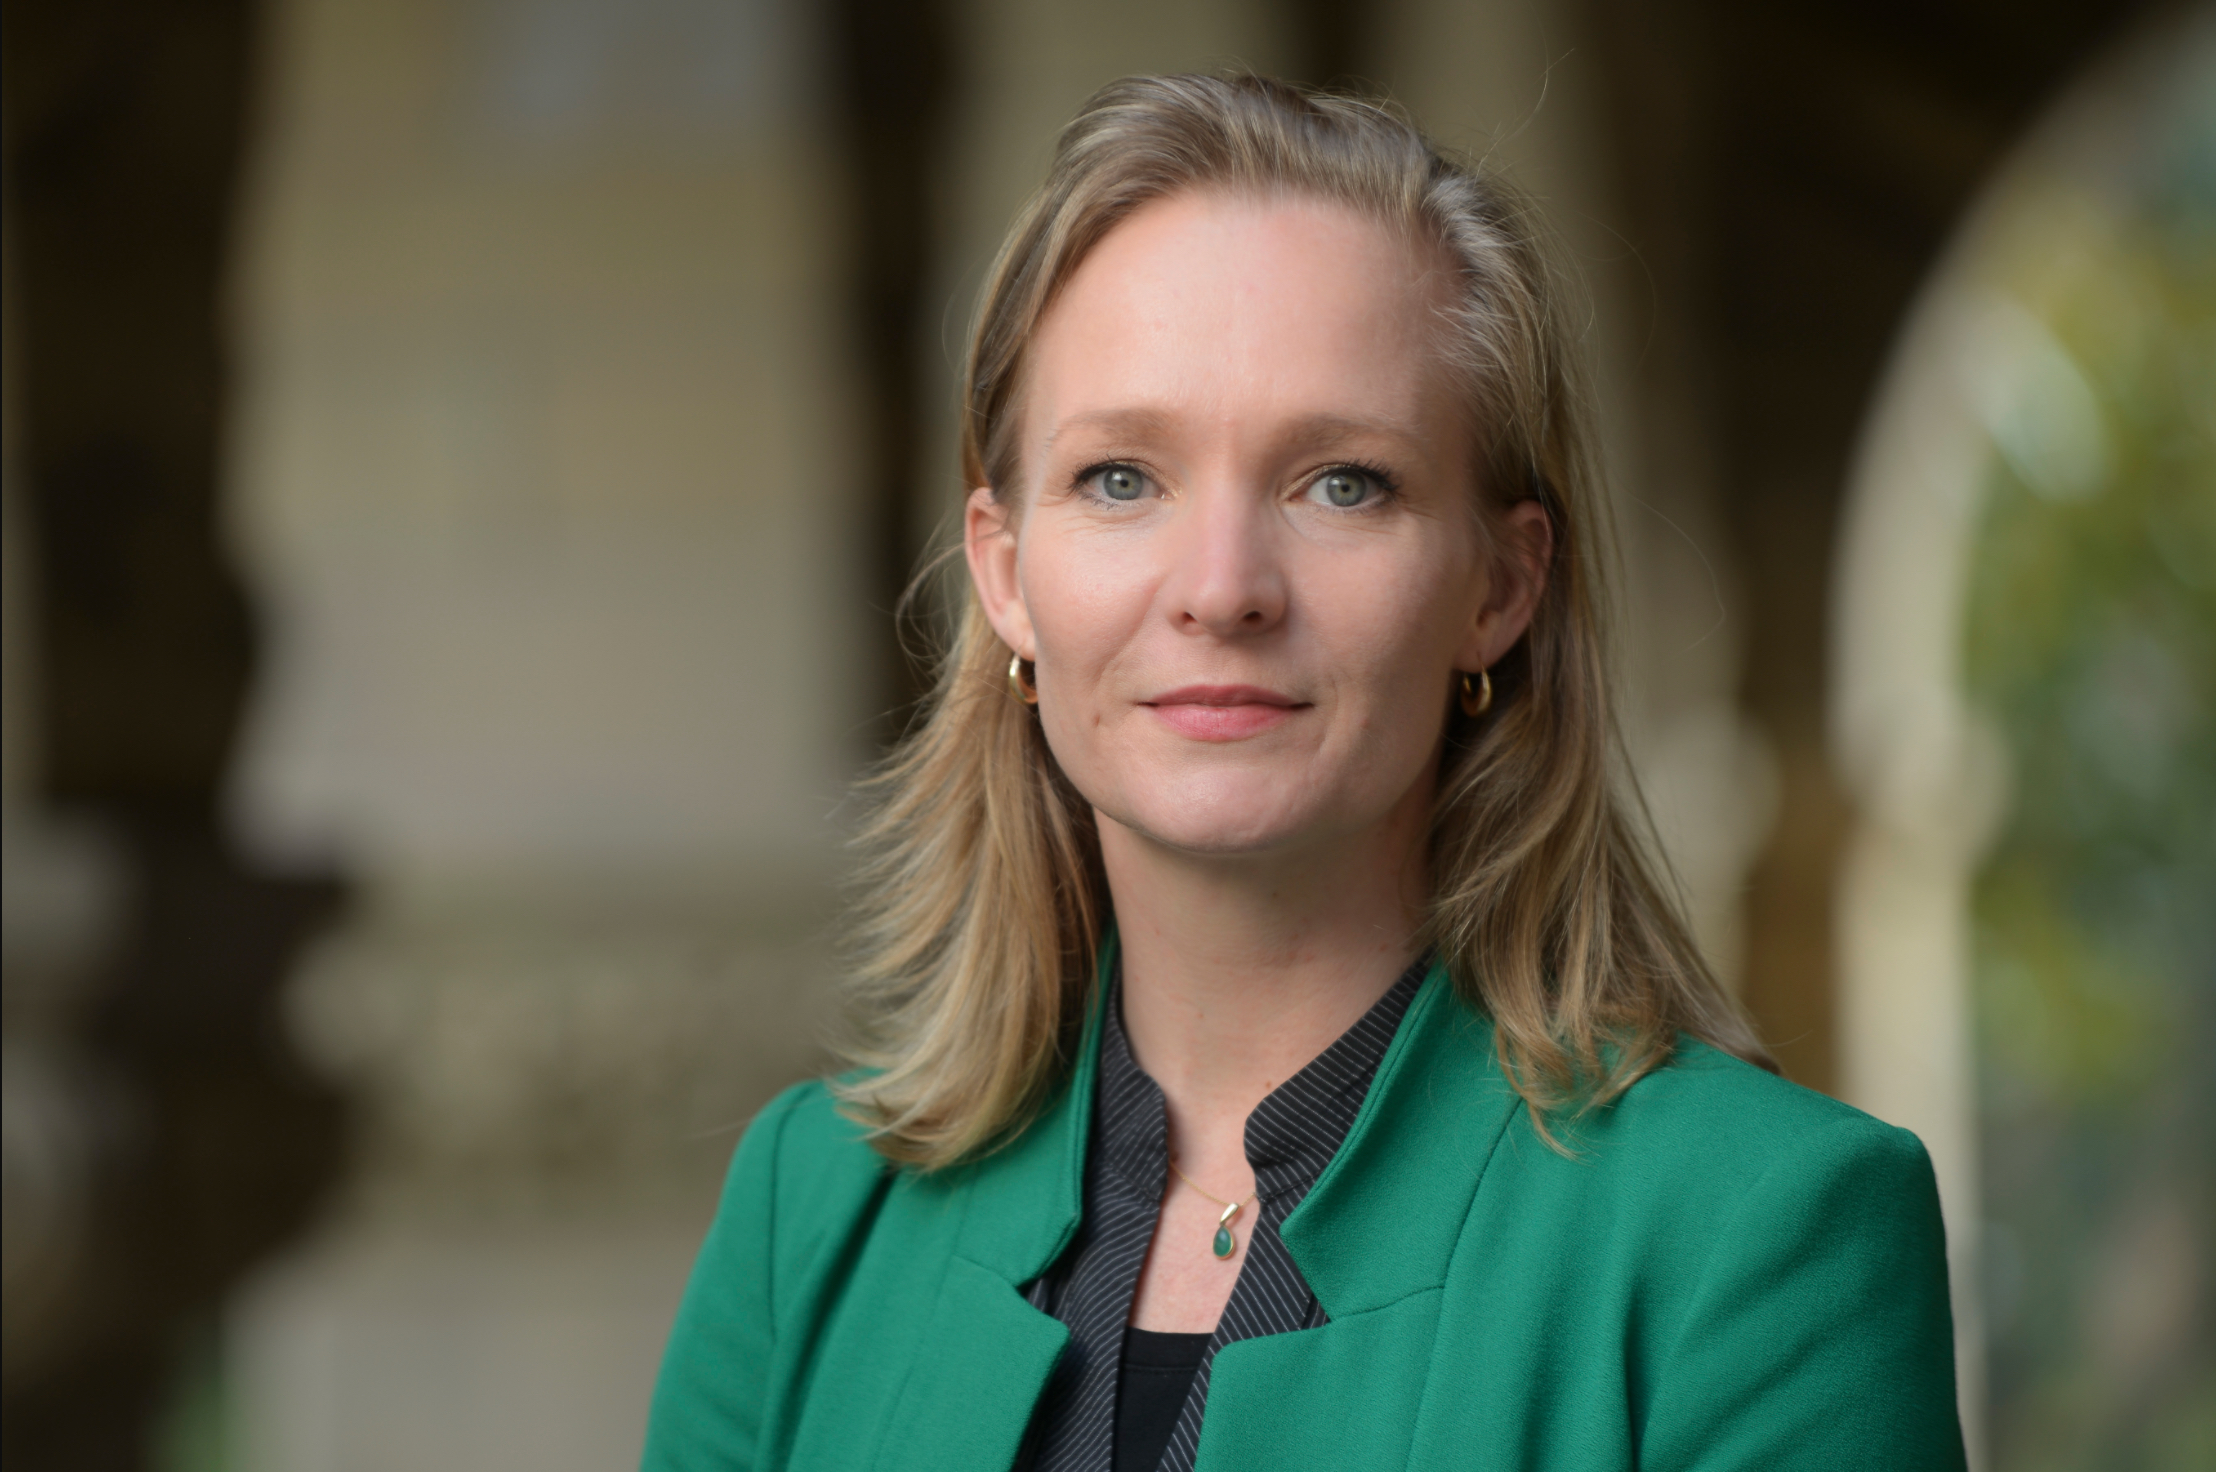 Marietje Schaake is the president of the Cyber Peace Institute in Geneva